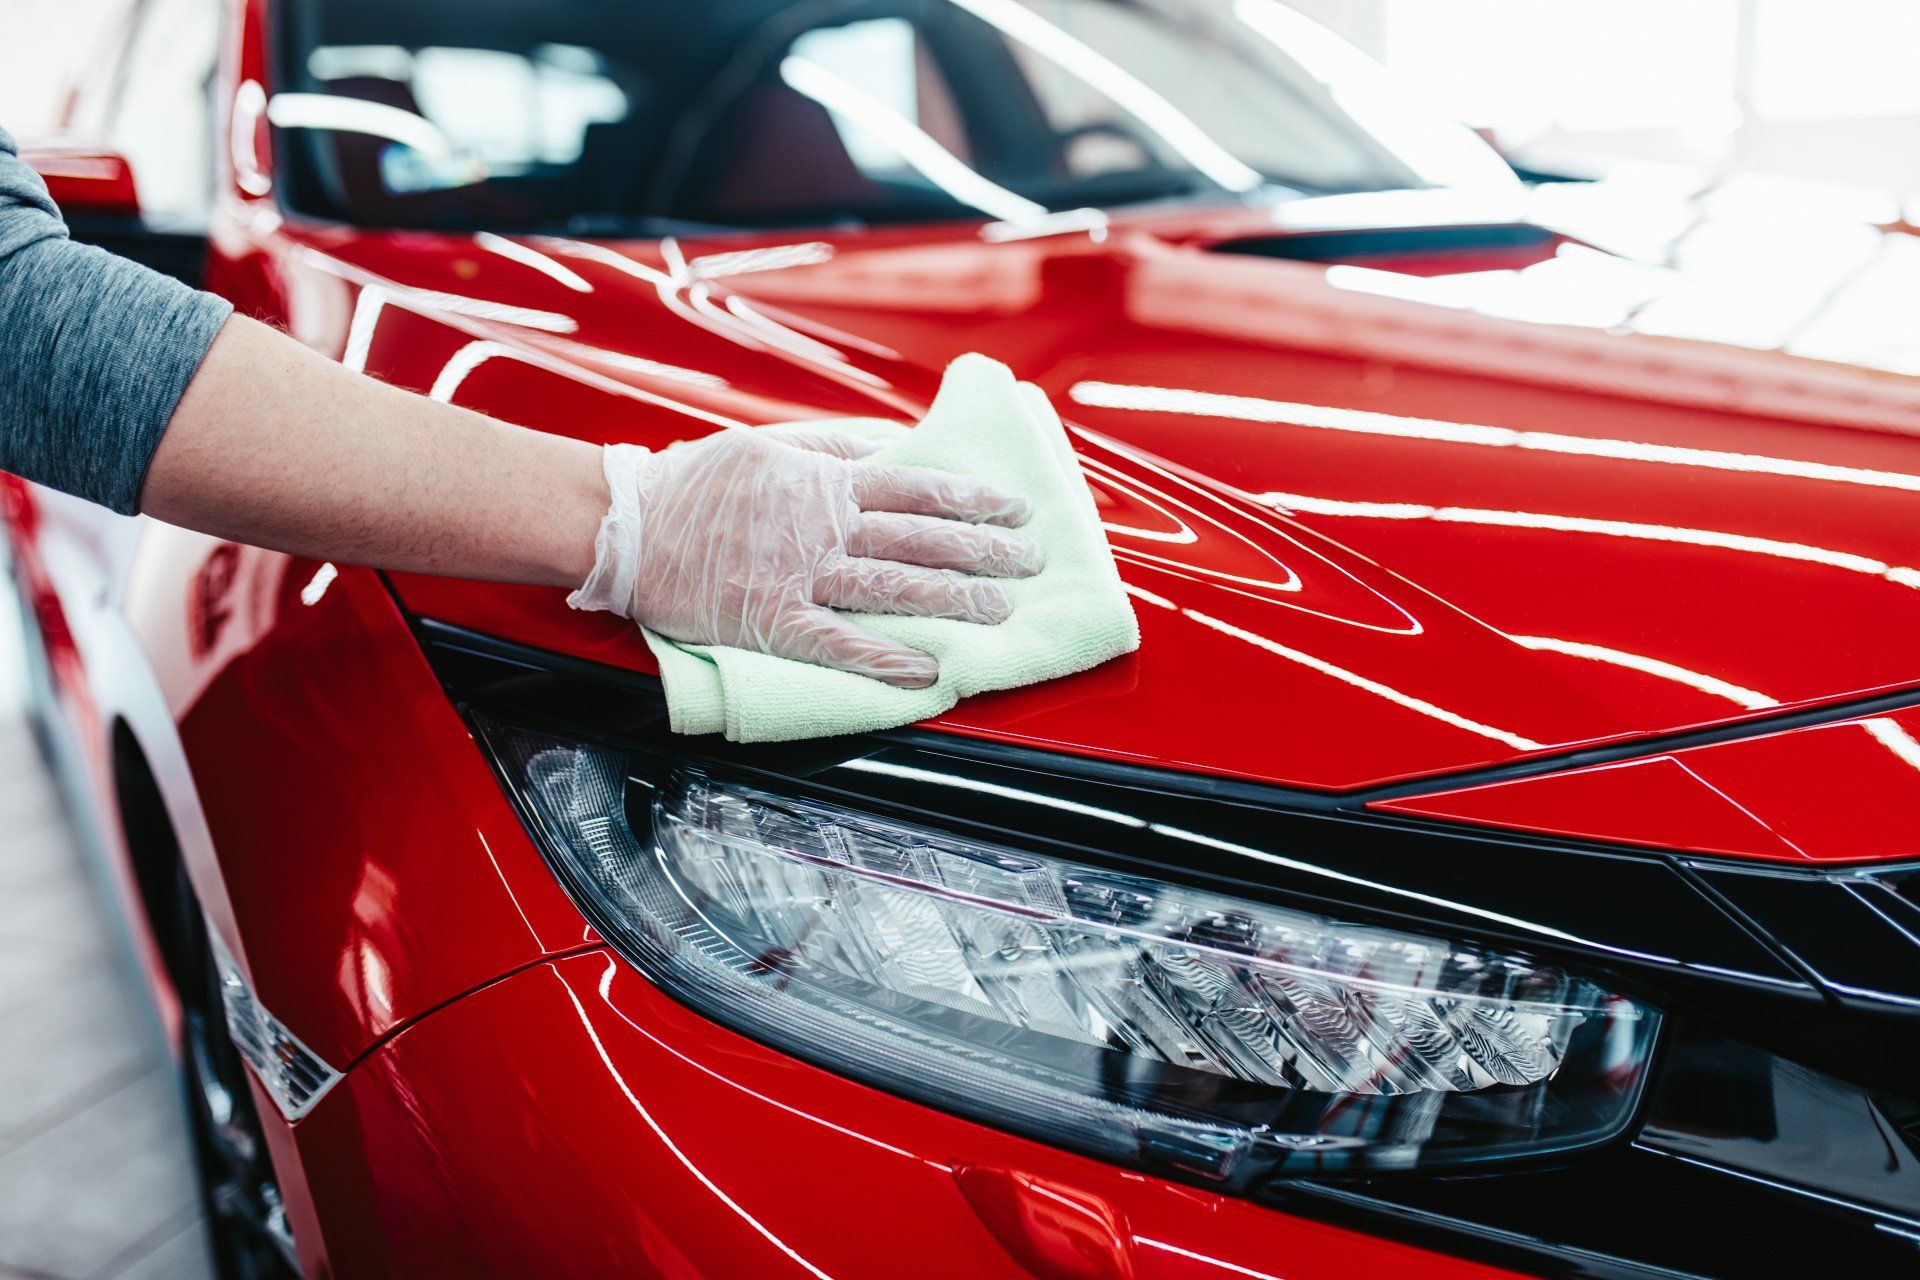 How to Maintain Paint Protection Film - 7 Easy Tips